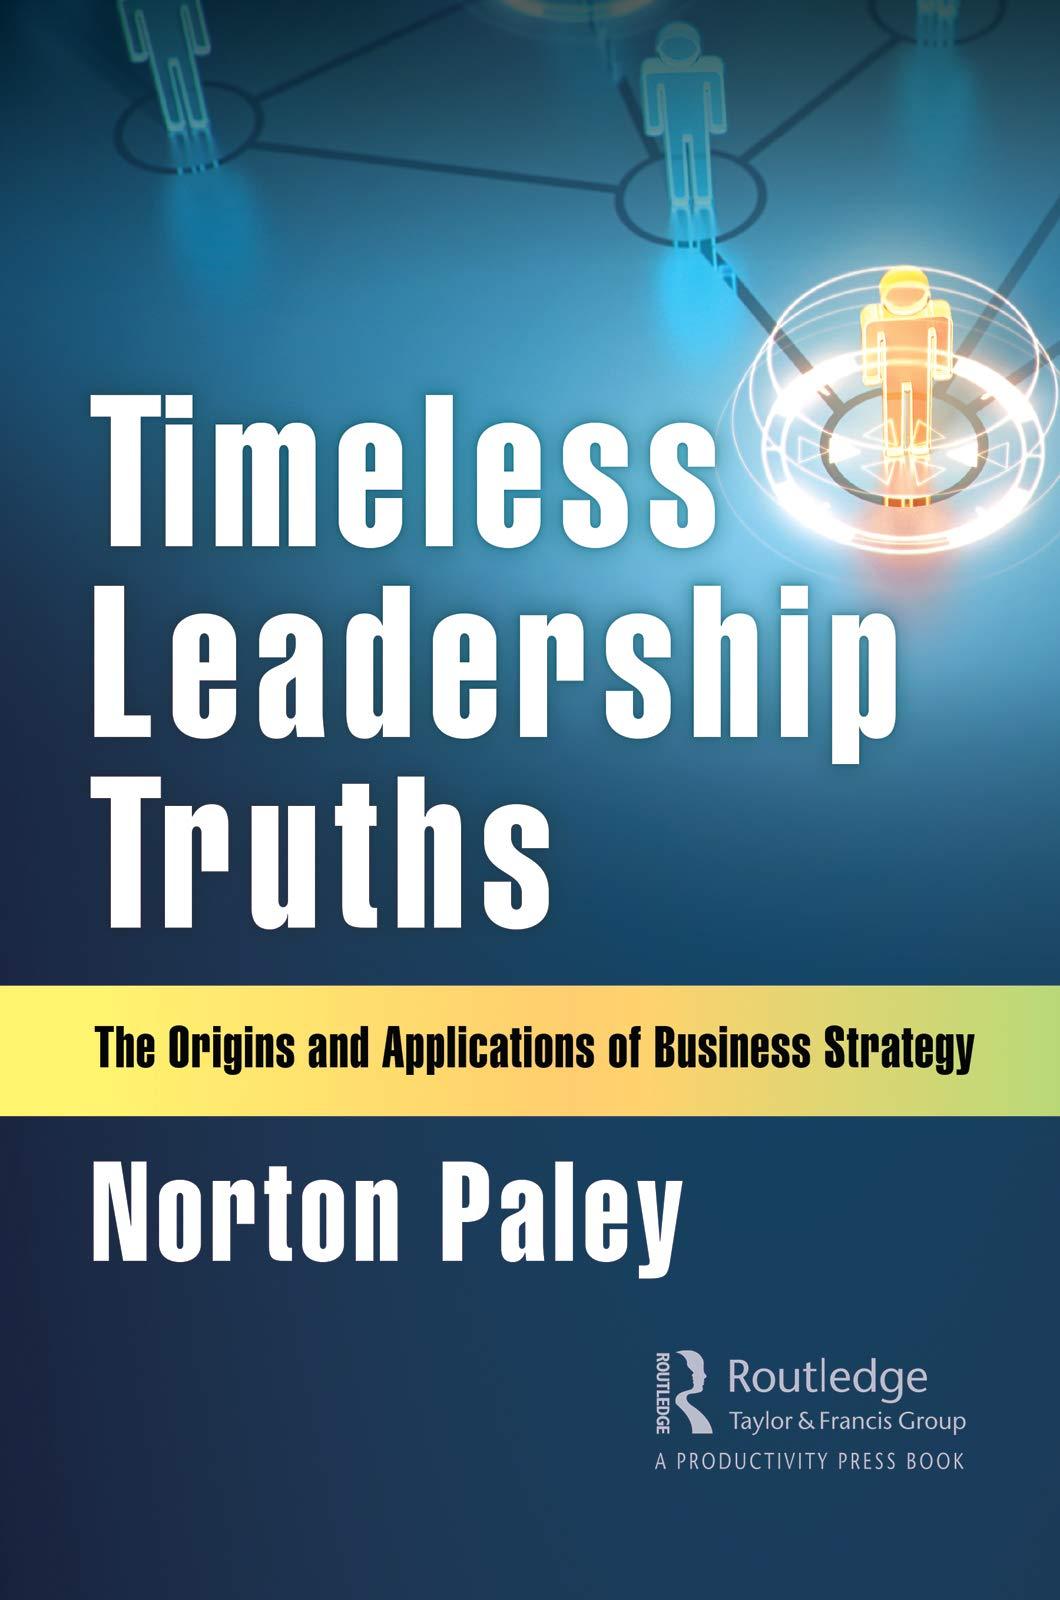 timeless leadership truths the origins and applications of business strategy 1st edition norton paley